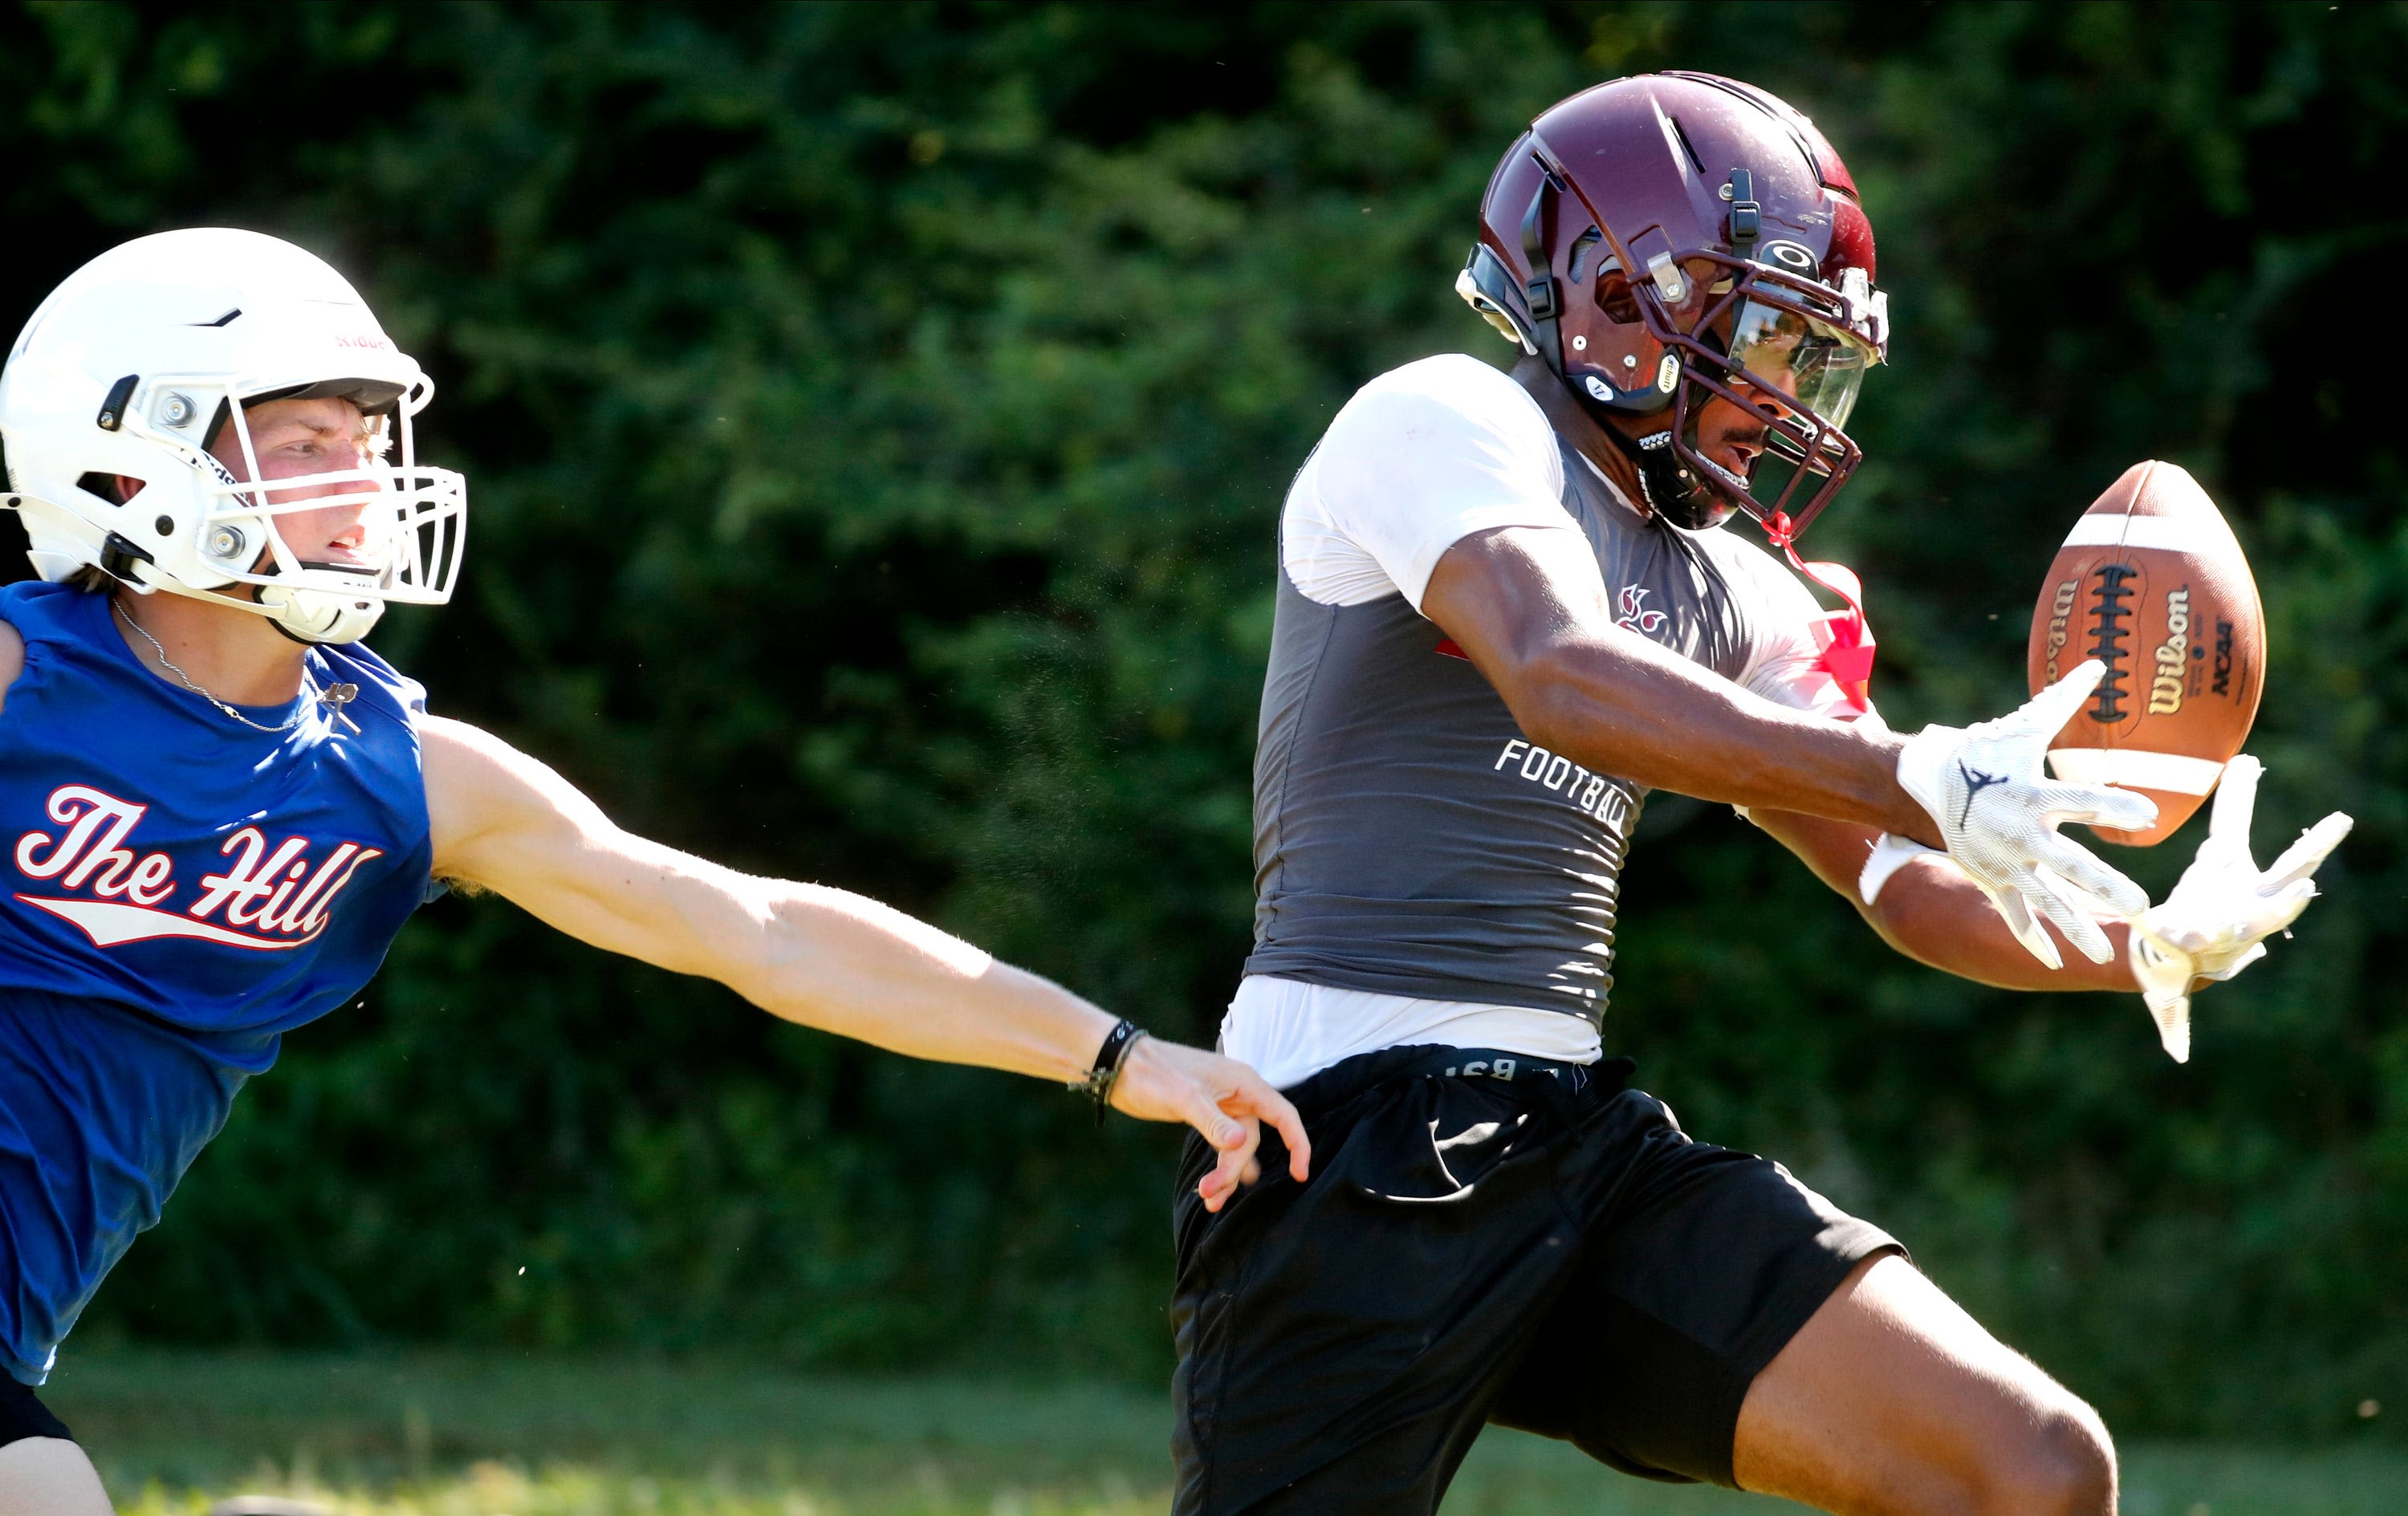 Riverdale football 7-on-7 tournament: Our best photos